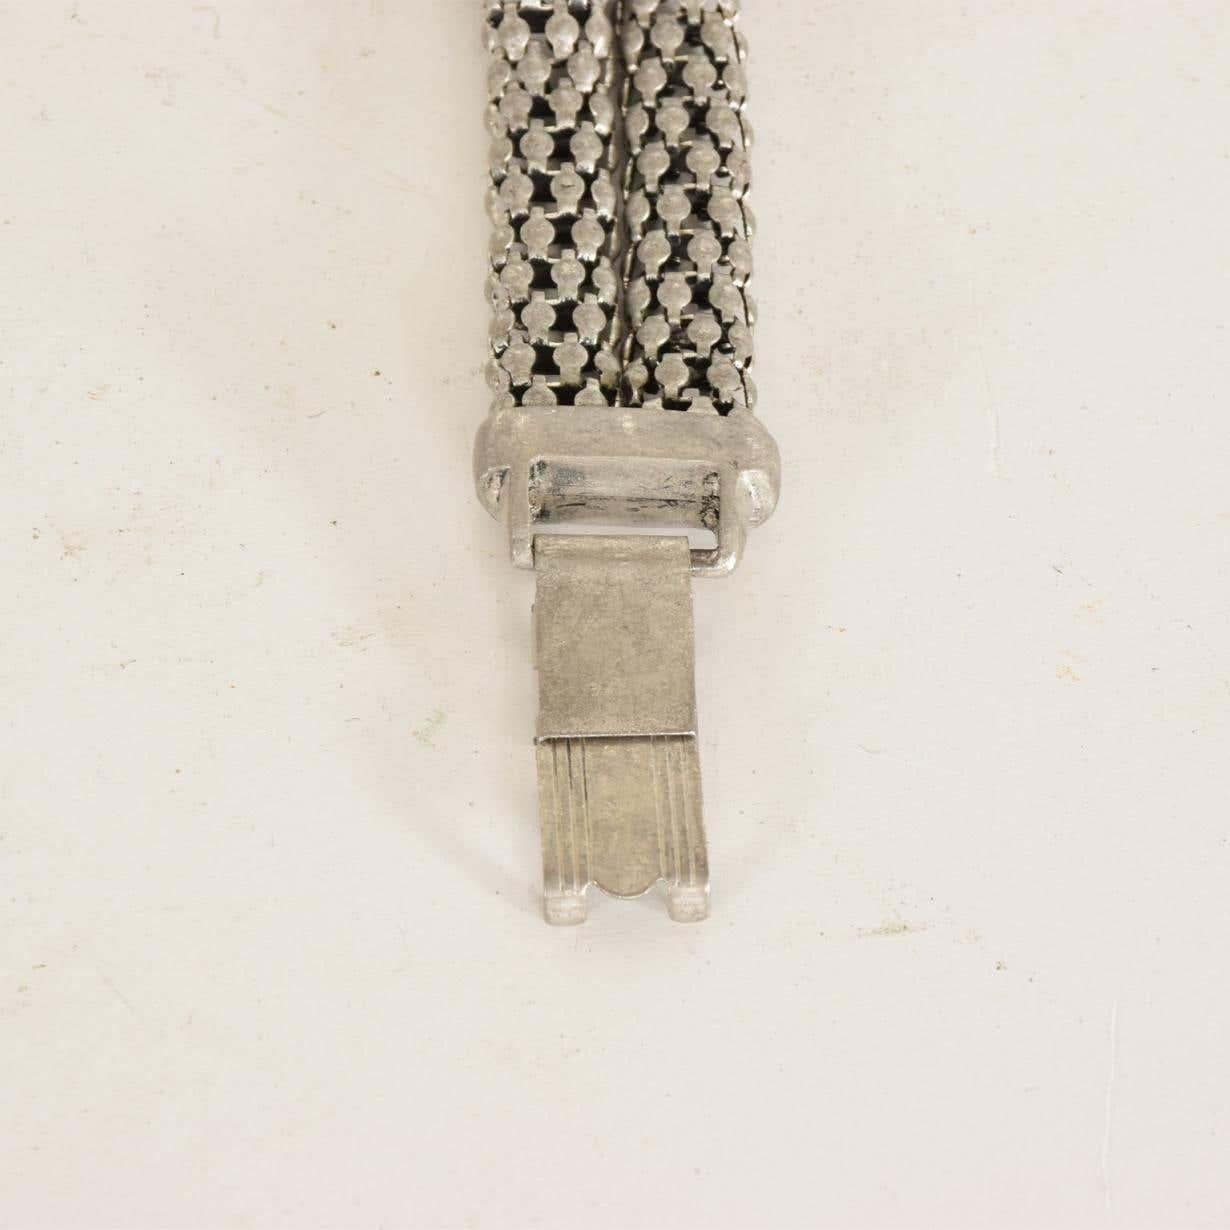 Art Deco period sculptural aluminum twisted french cable bracelet, 1940s.
Fabulous sculptural modernist design center knot double row wide band
In the style of contemporary designer David Yurman cable classic and aluminum designs.
Unmarked, no